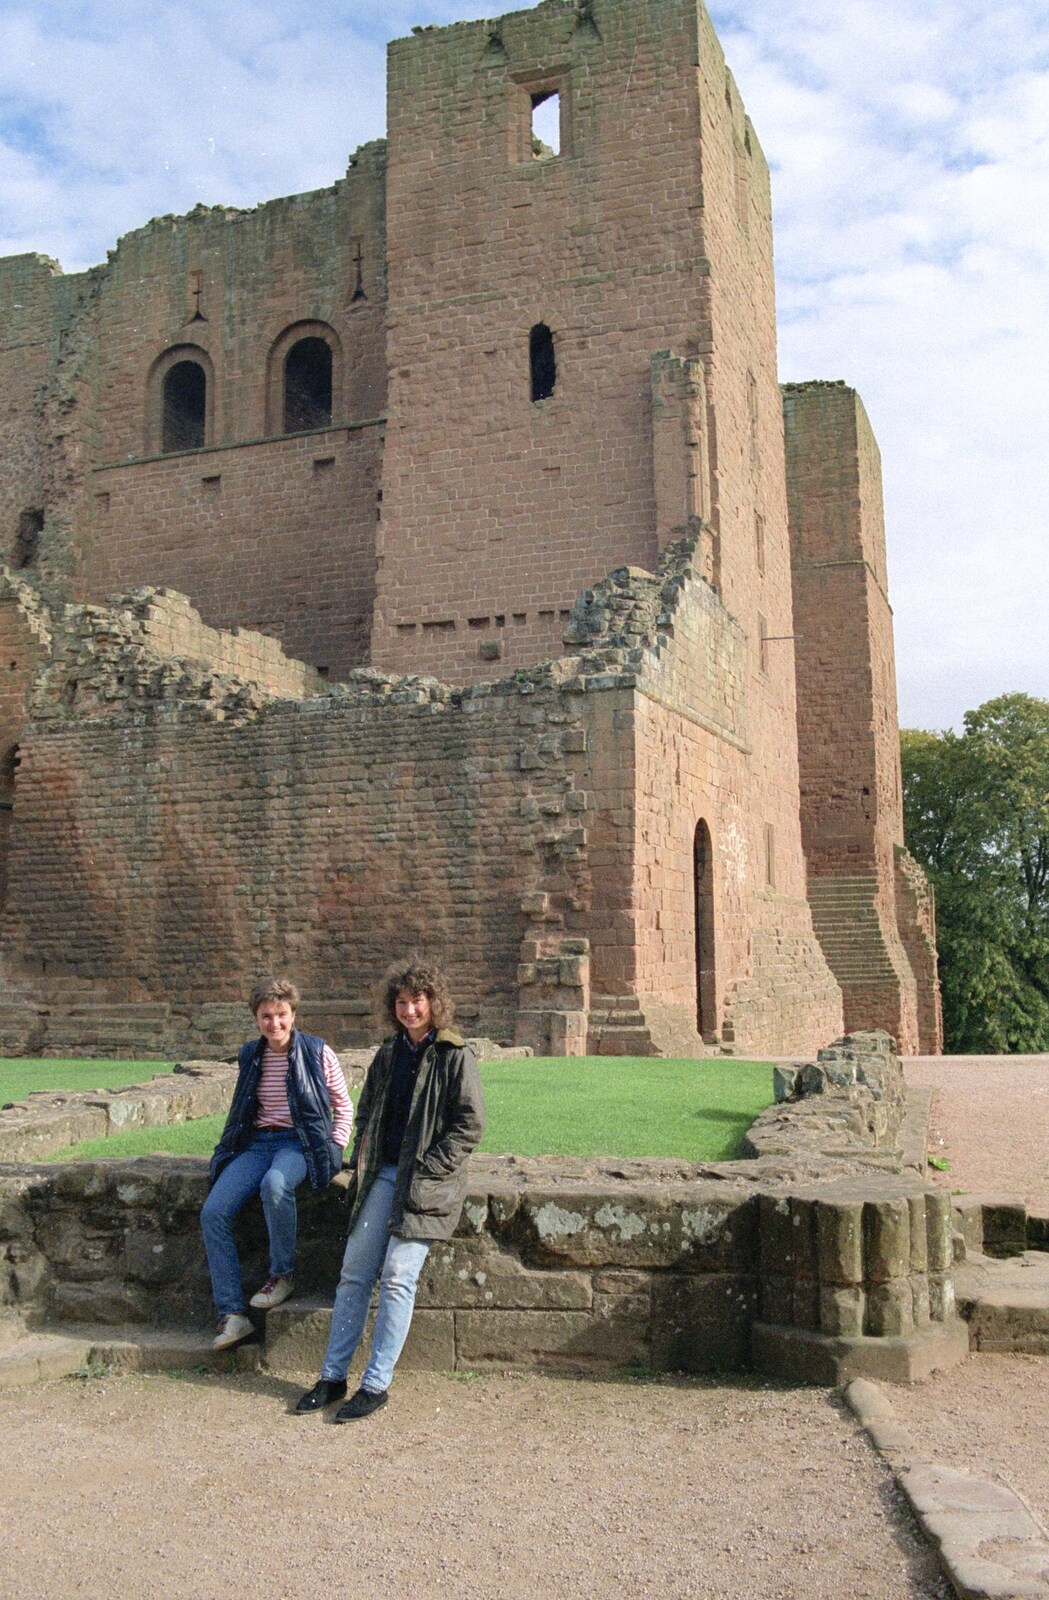 Angela and friend in front of the main keep from A Trip to Kenilworth, Warwickshire - 21st September 1989